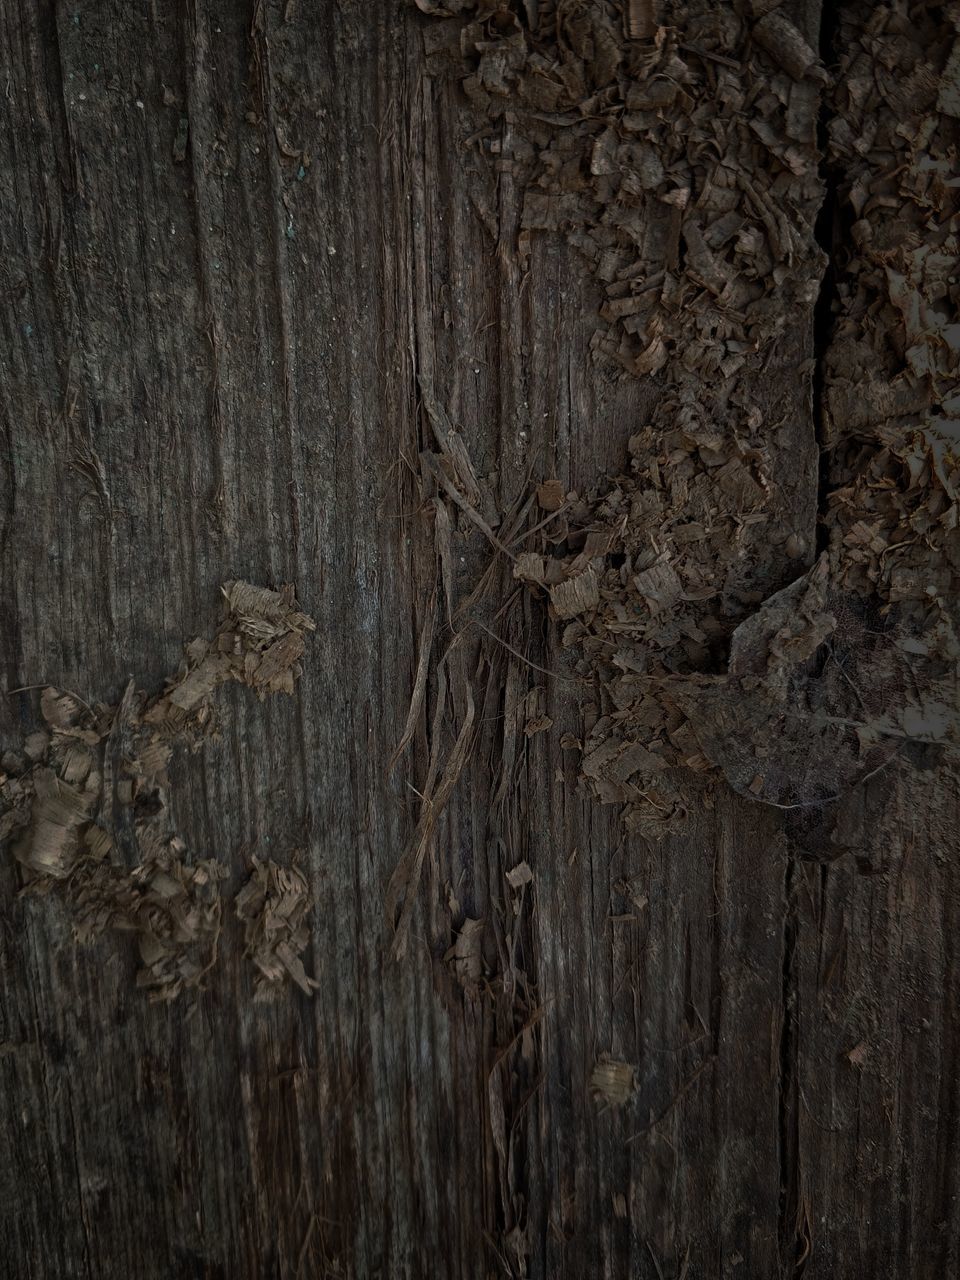 wood, backgrounds, textured, full frame, no people, pattern, close-up, soil, brown, rough, floor, tree, dark, wood grain, old, plank, flooring, trunk, indoors, weathered, nature